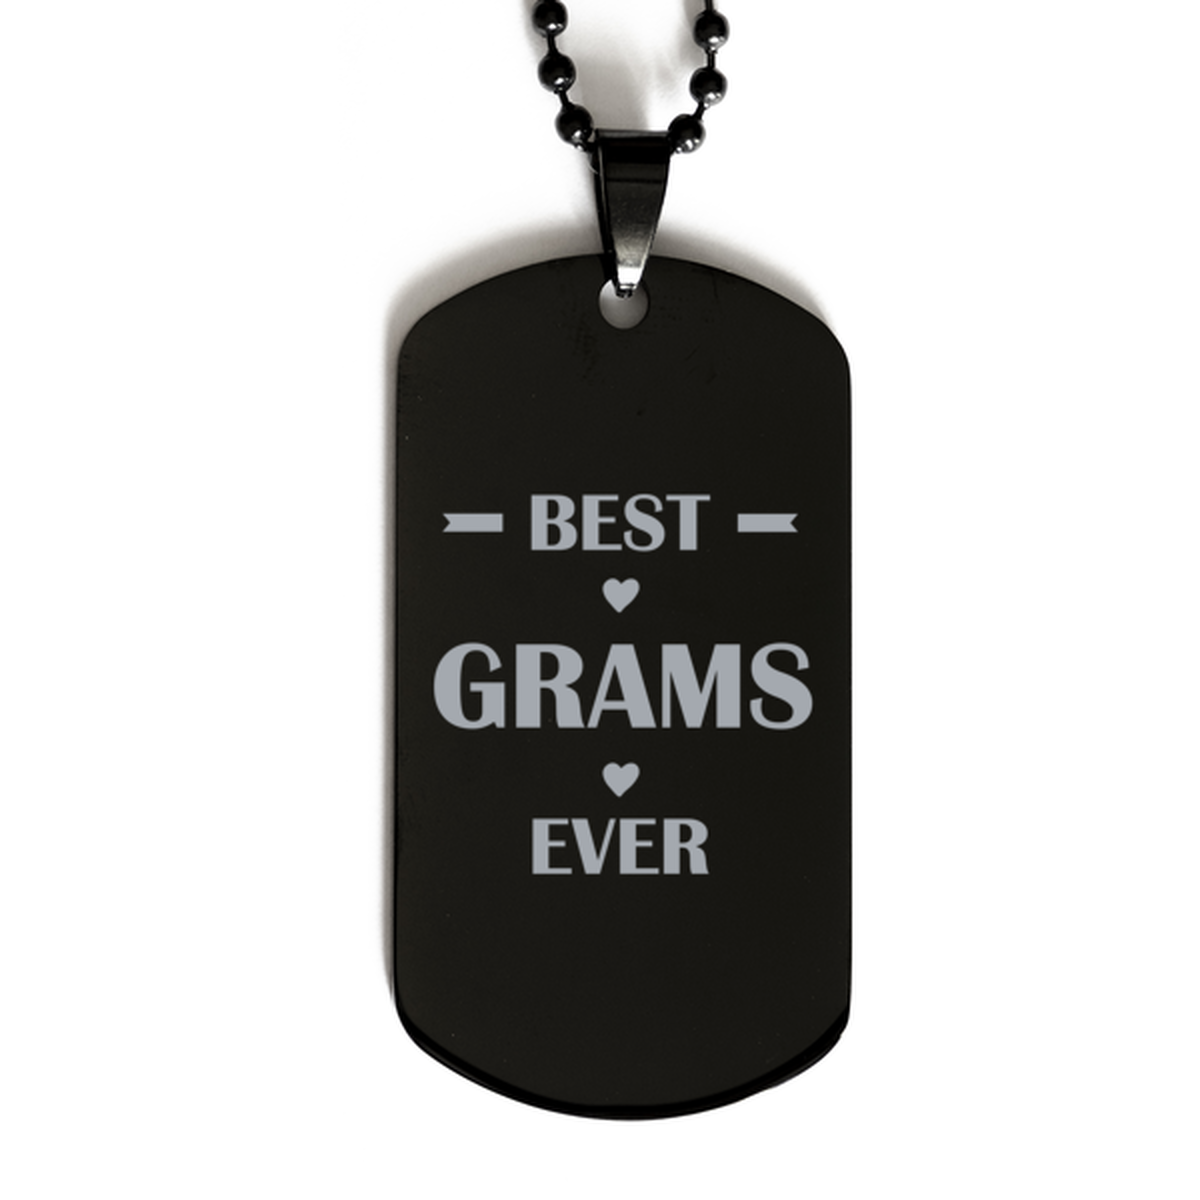 Best Grams Ever Grams Gifts, Funny Black Dog Tag For Grams, Birthday Family Presents Engraved Necklace For Women